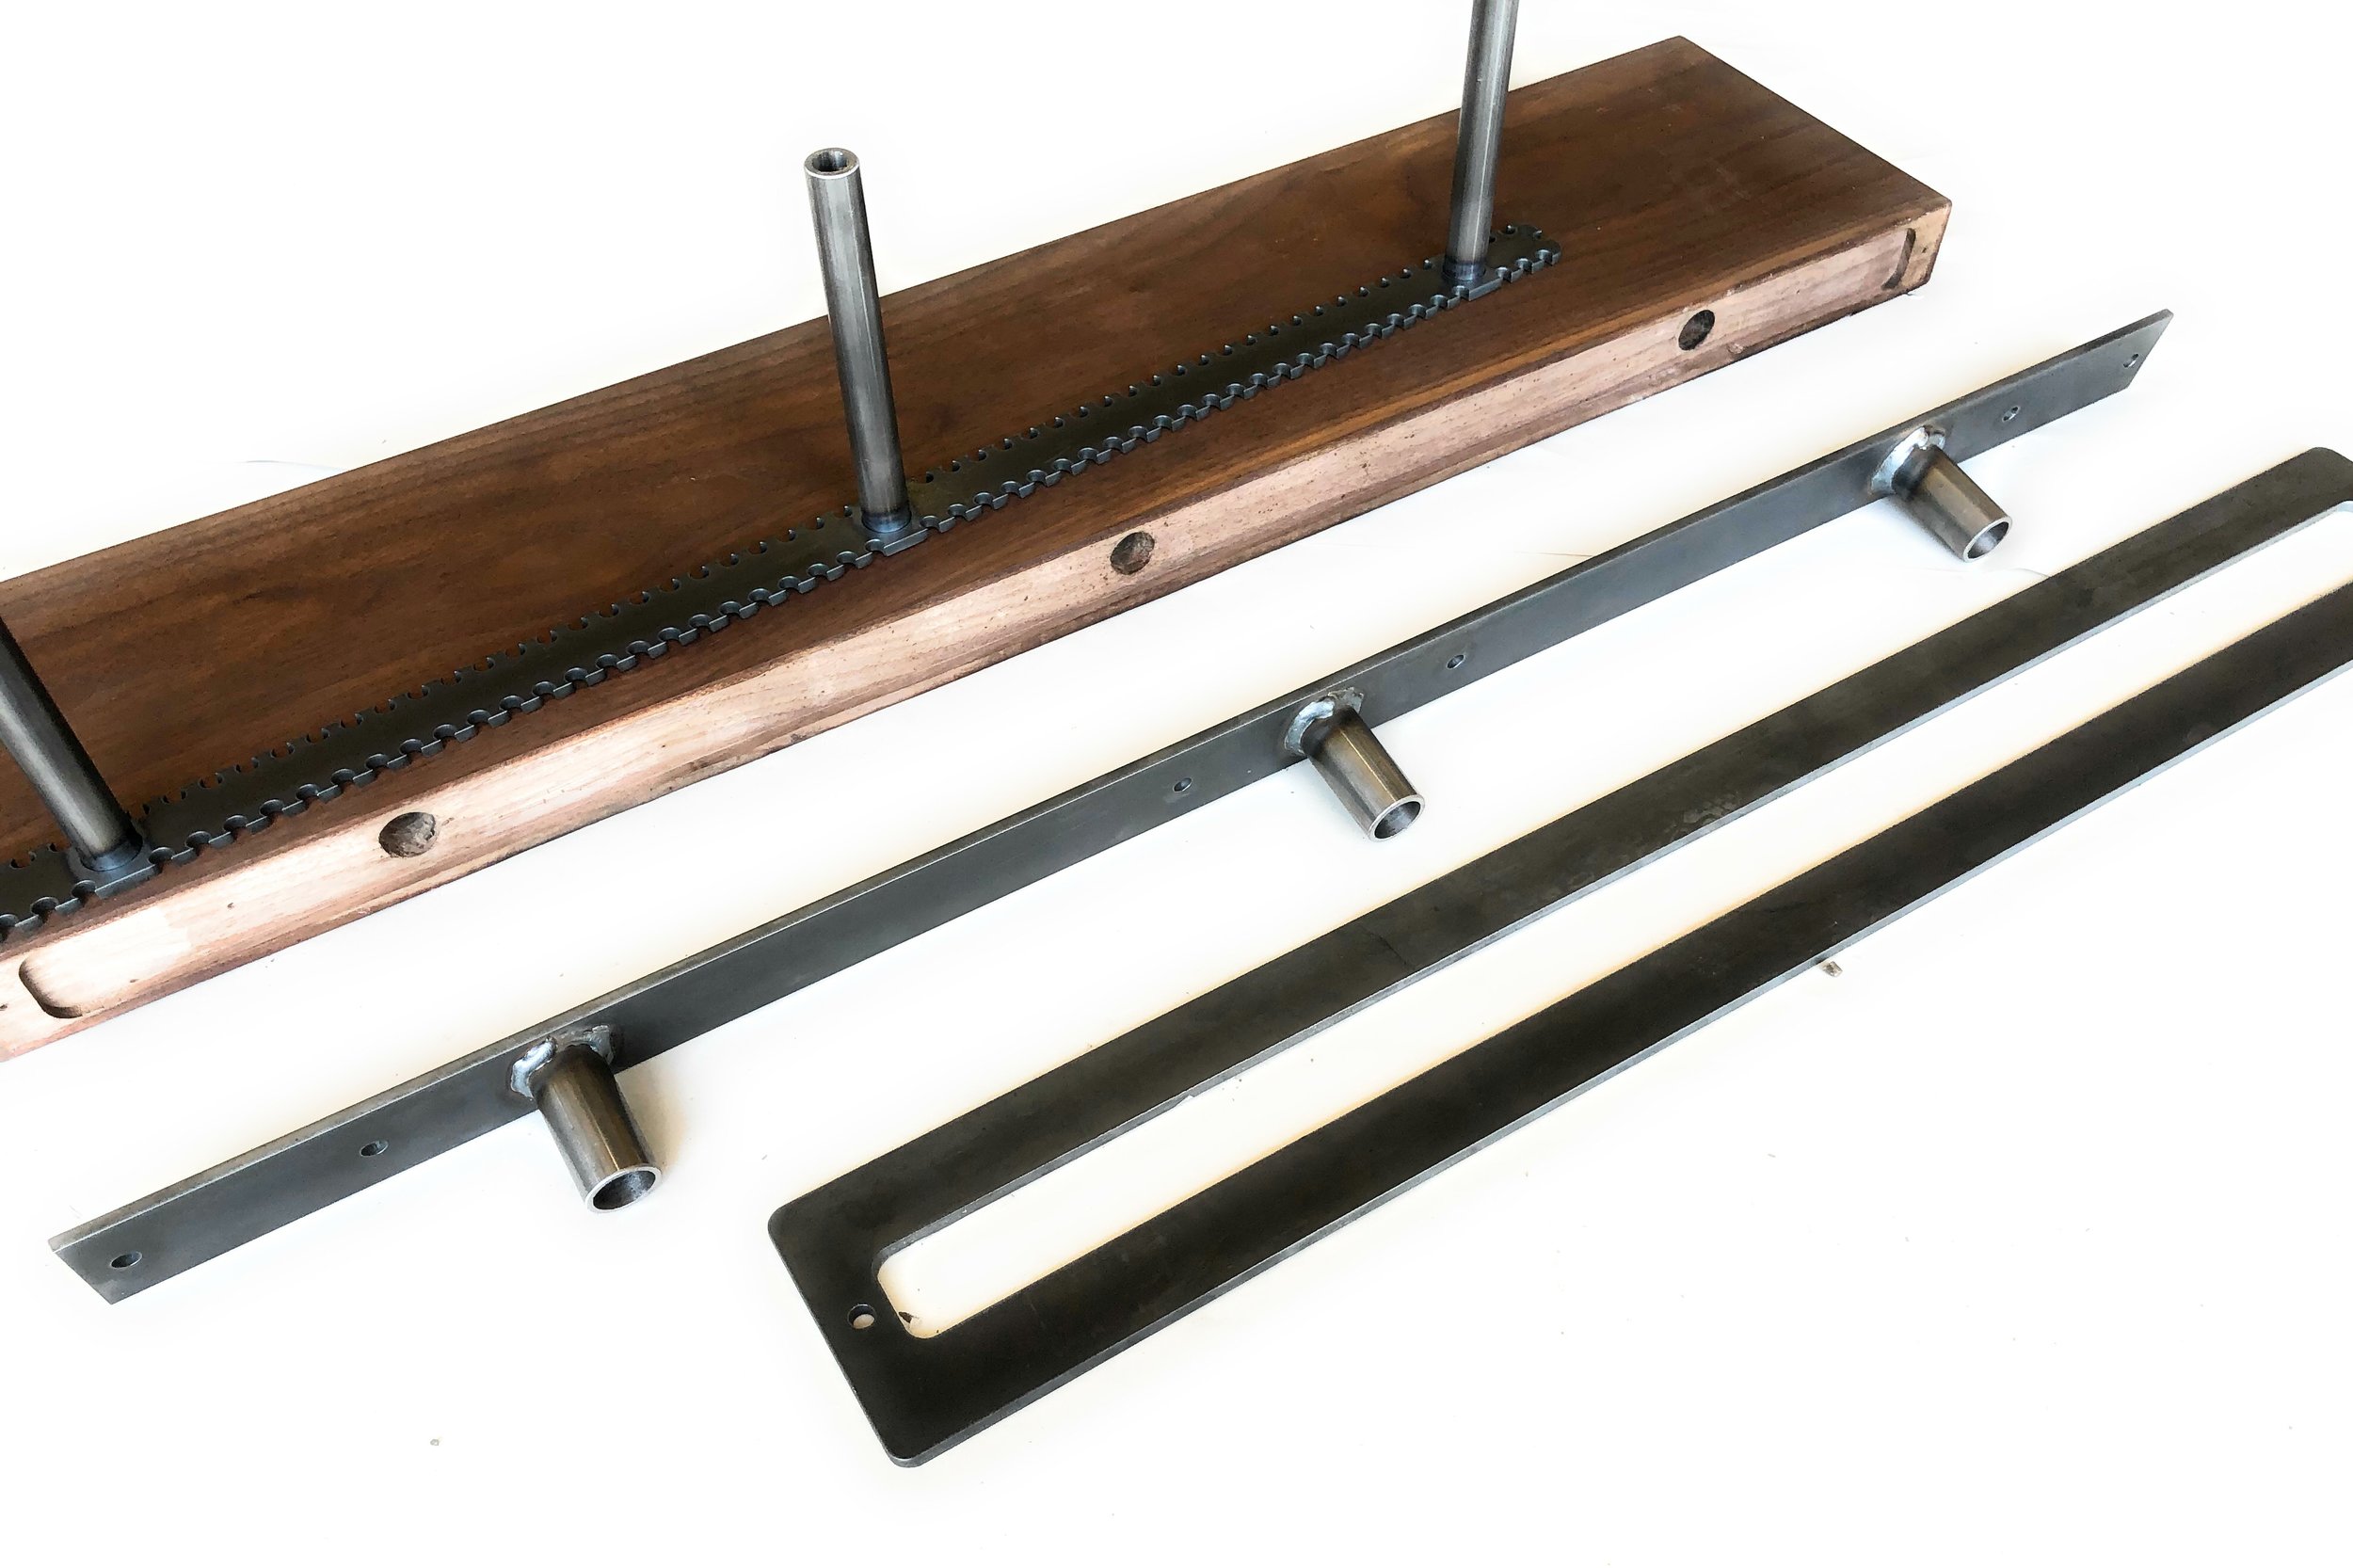 Kit For Preparing A Floating Shelf, How To Build Floating Shelves With Brackets